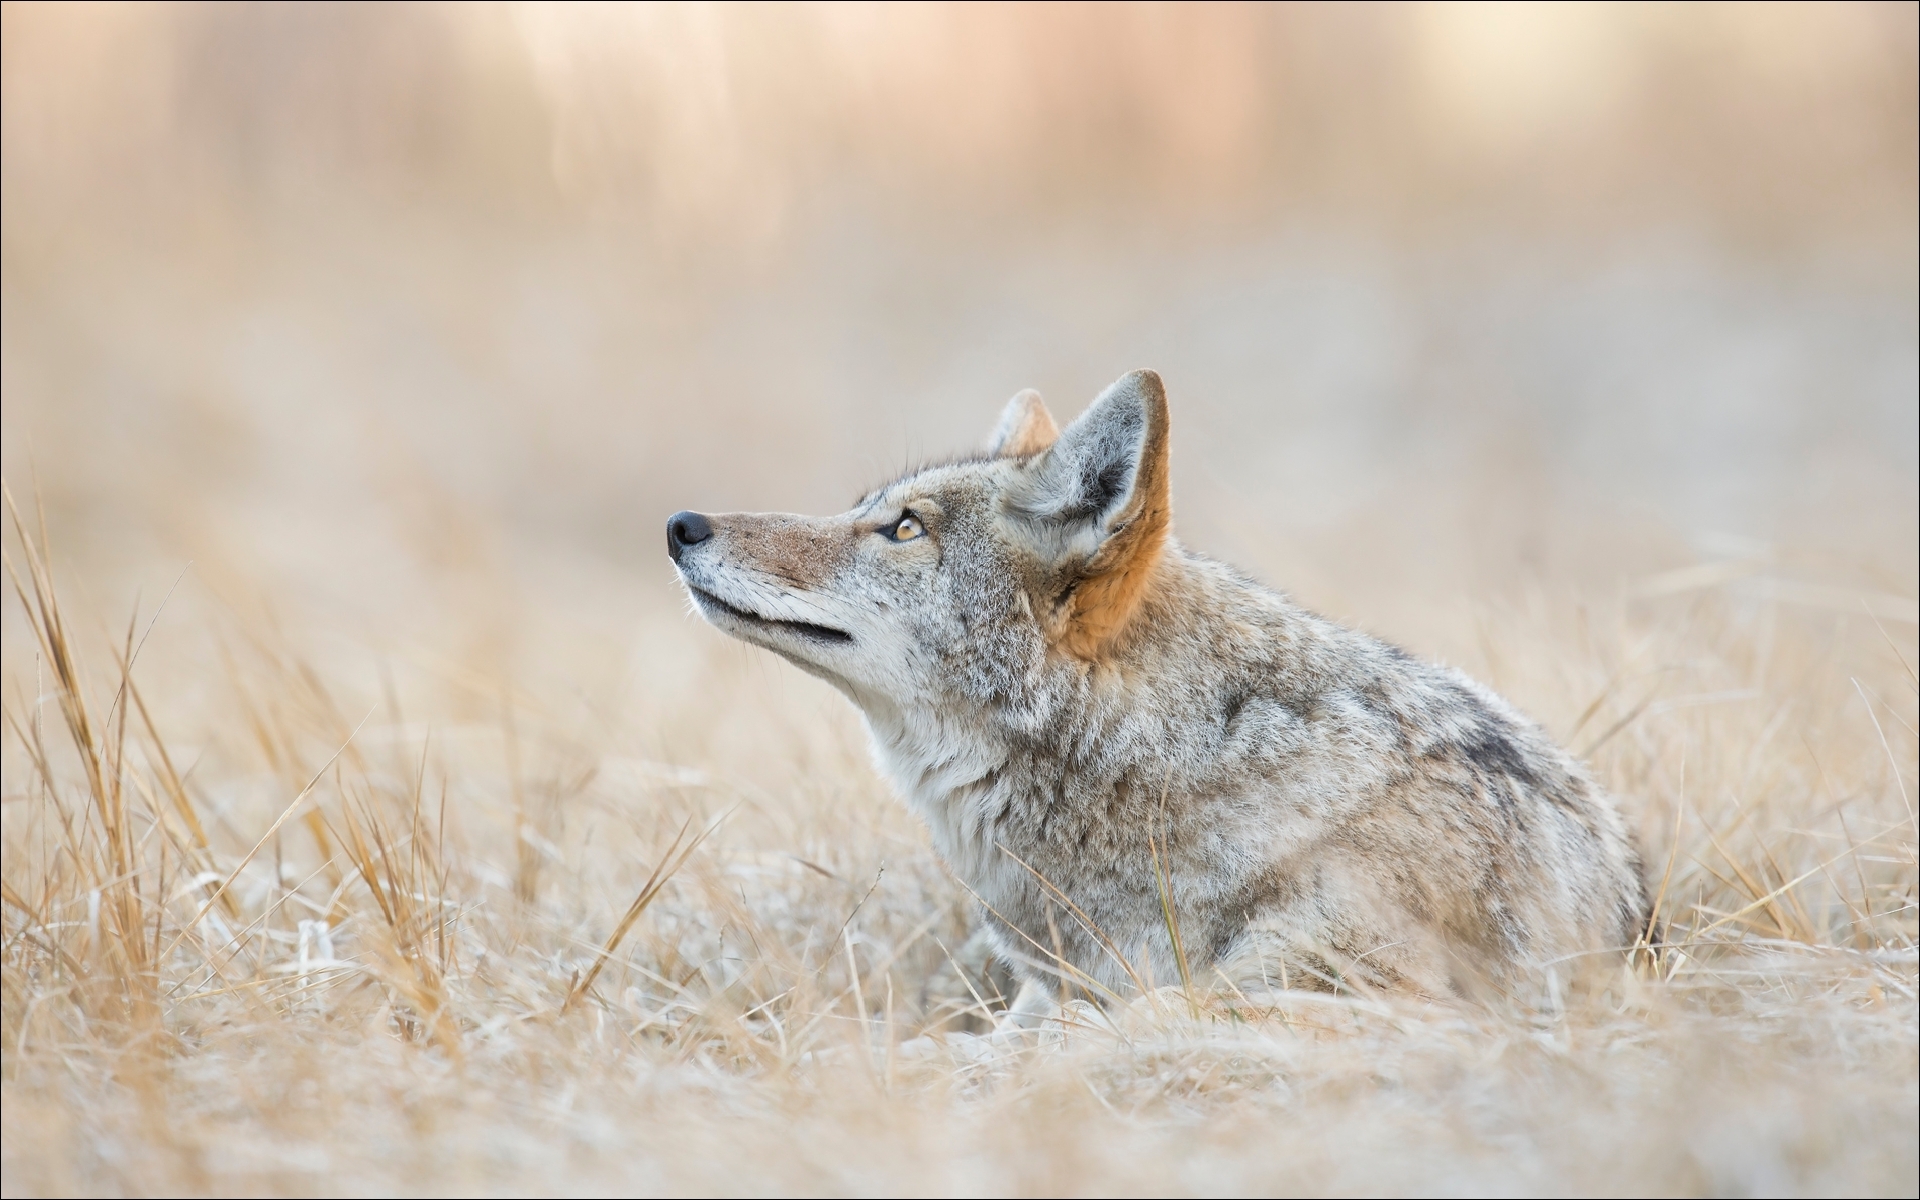 Coyote resting in a field in Yosemite National Park, California, USA by Tom Post